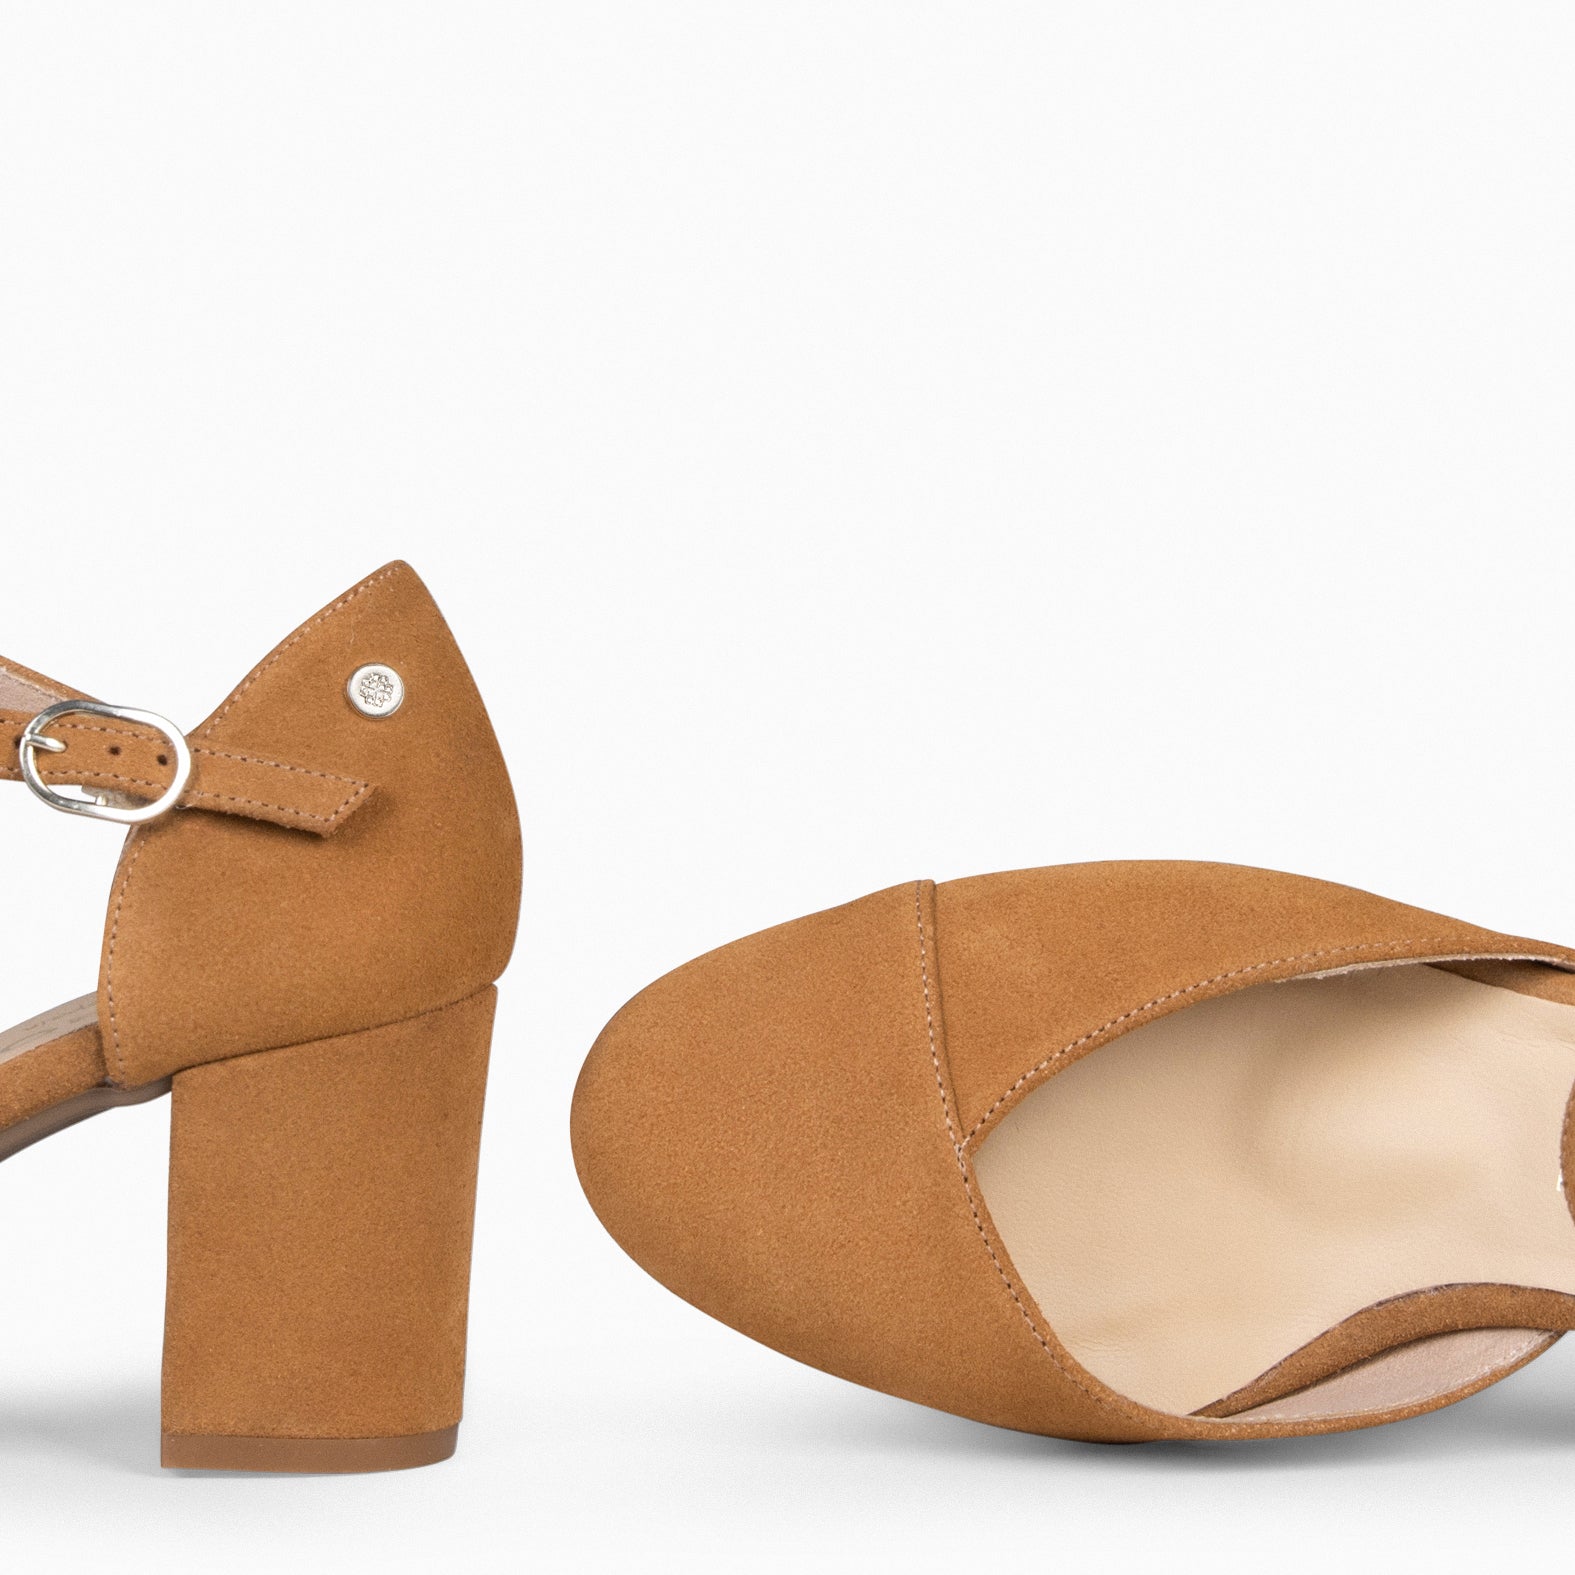 ISI – CAMEL HEEL WITH BUCKLE 